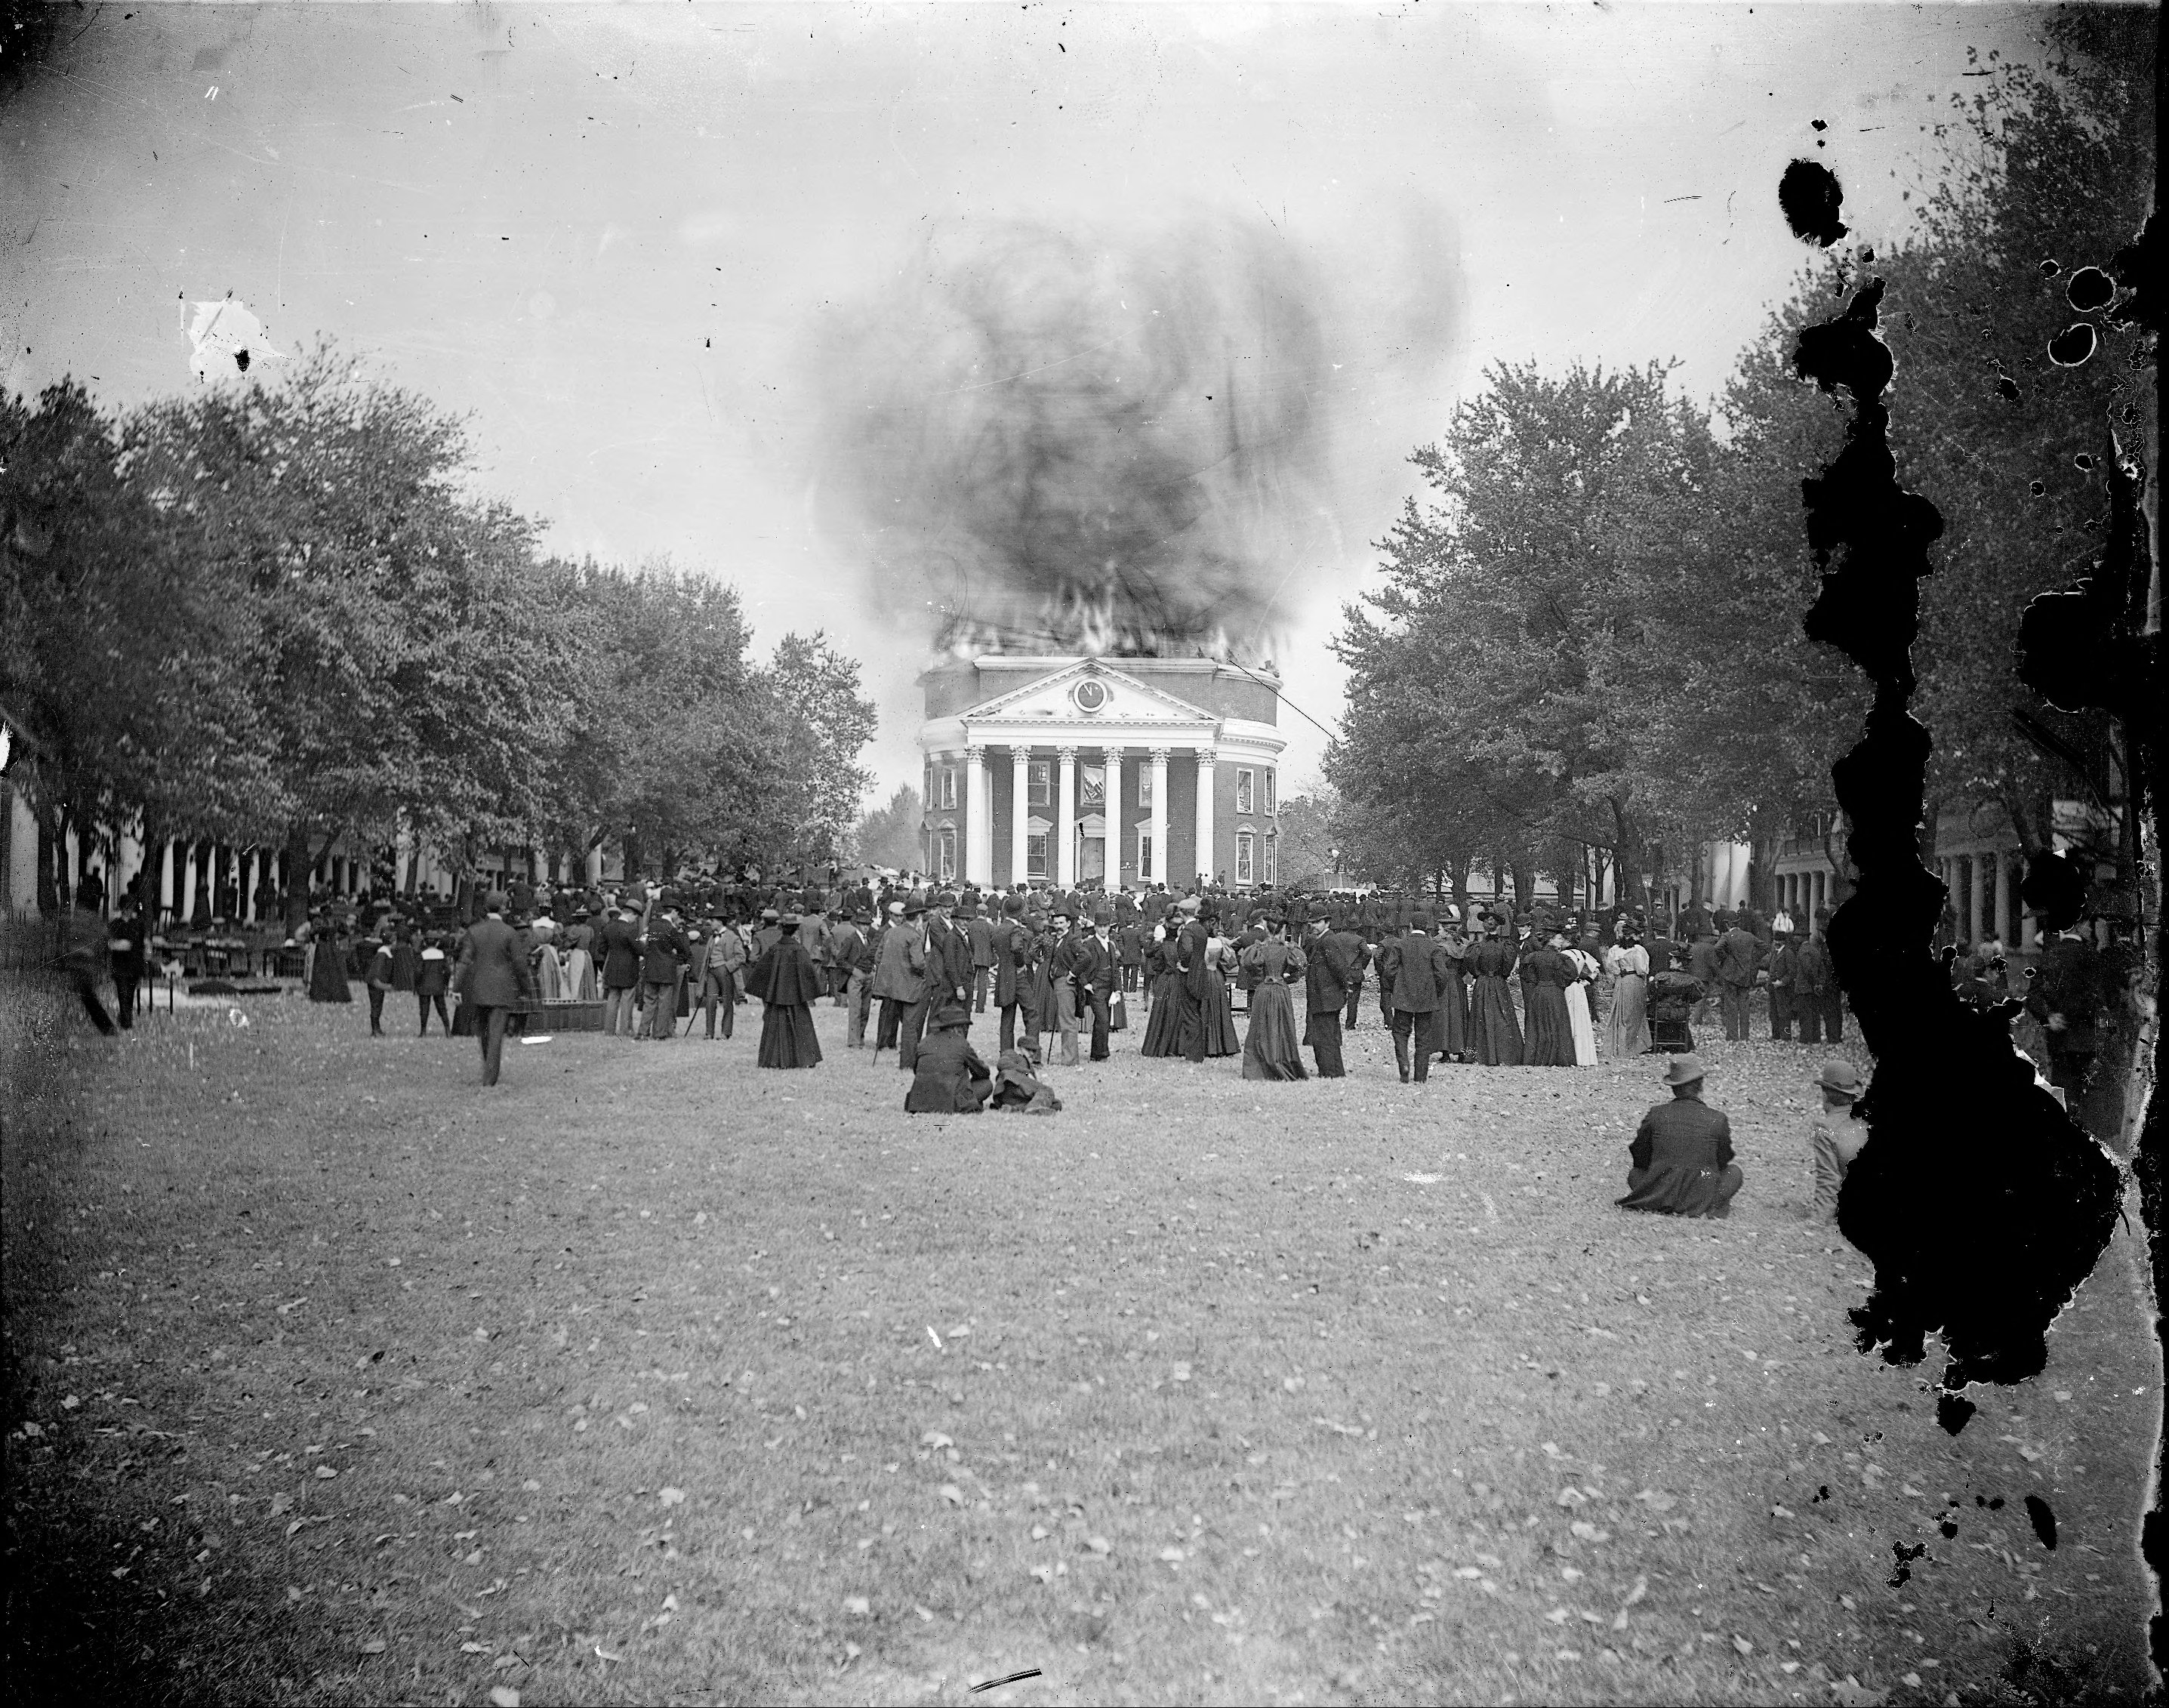 Smoke rising from the Rotunda dome during a fire. The lawn is packed with onlookers 